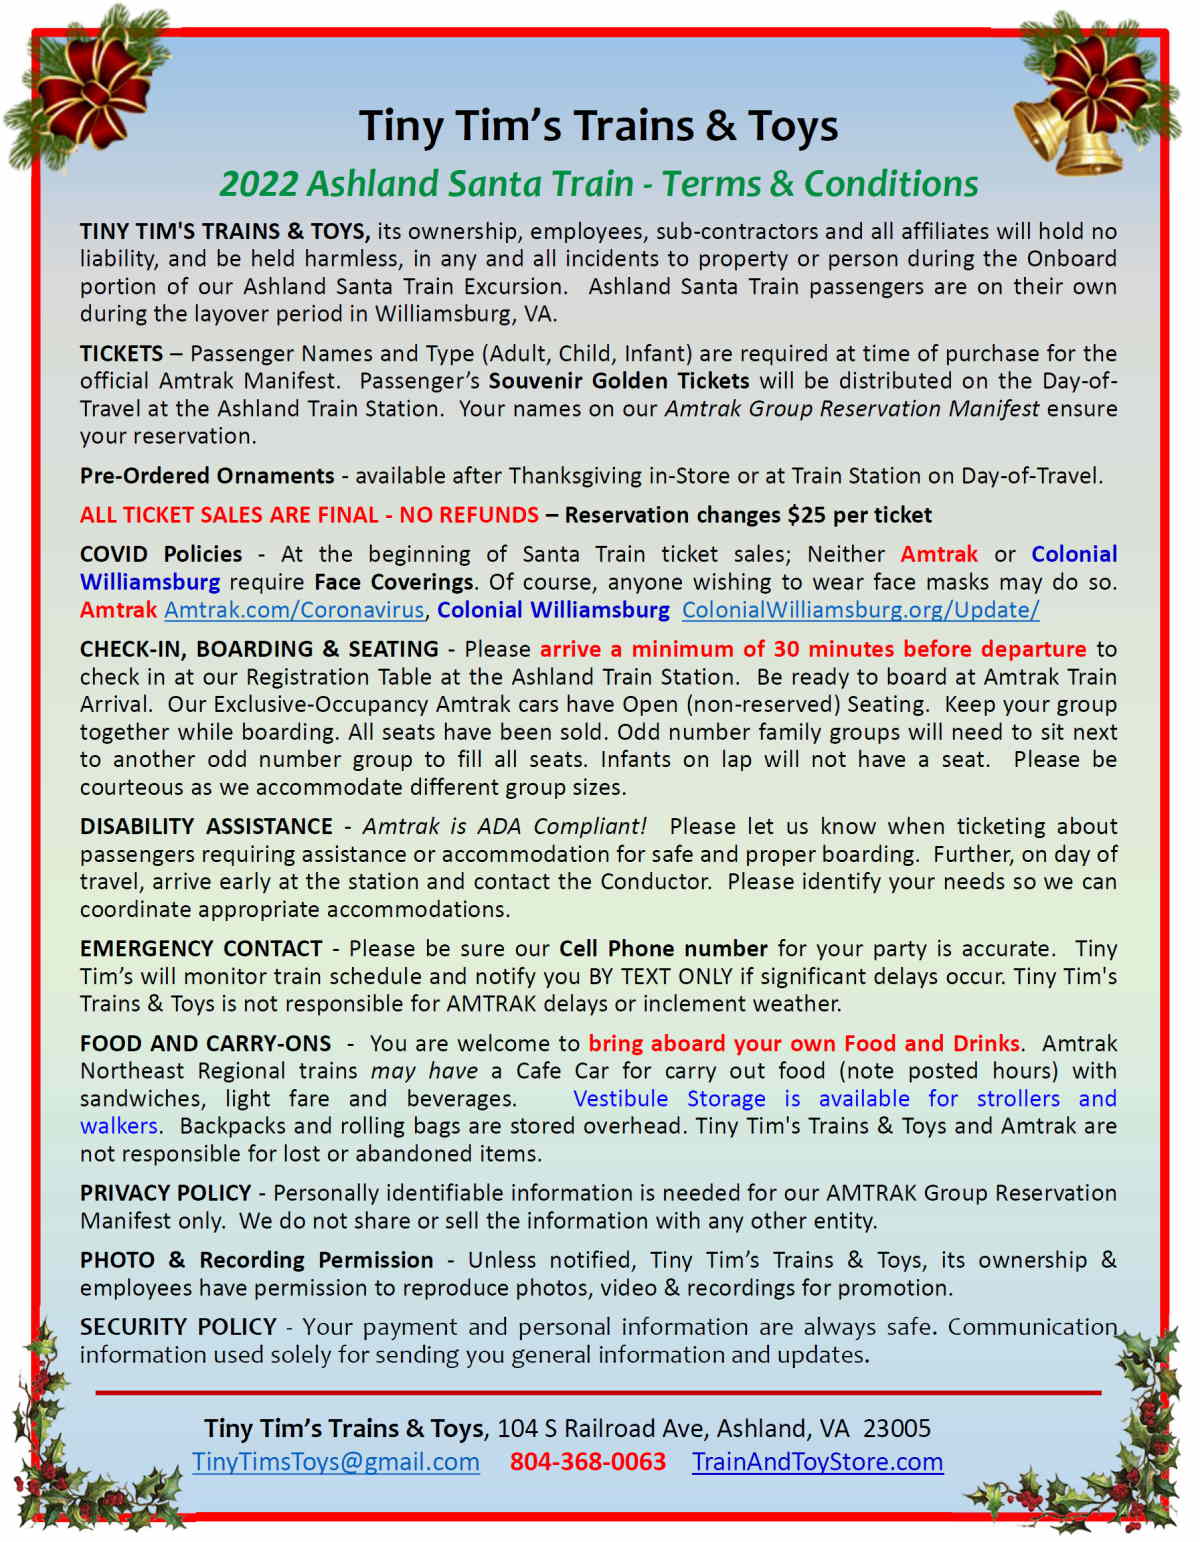 2022 Santa Train Terms and Conditions